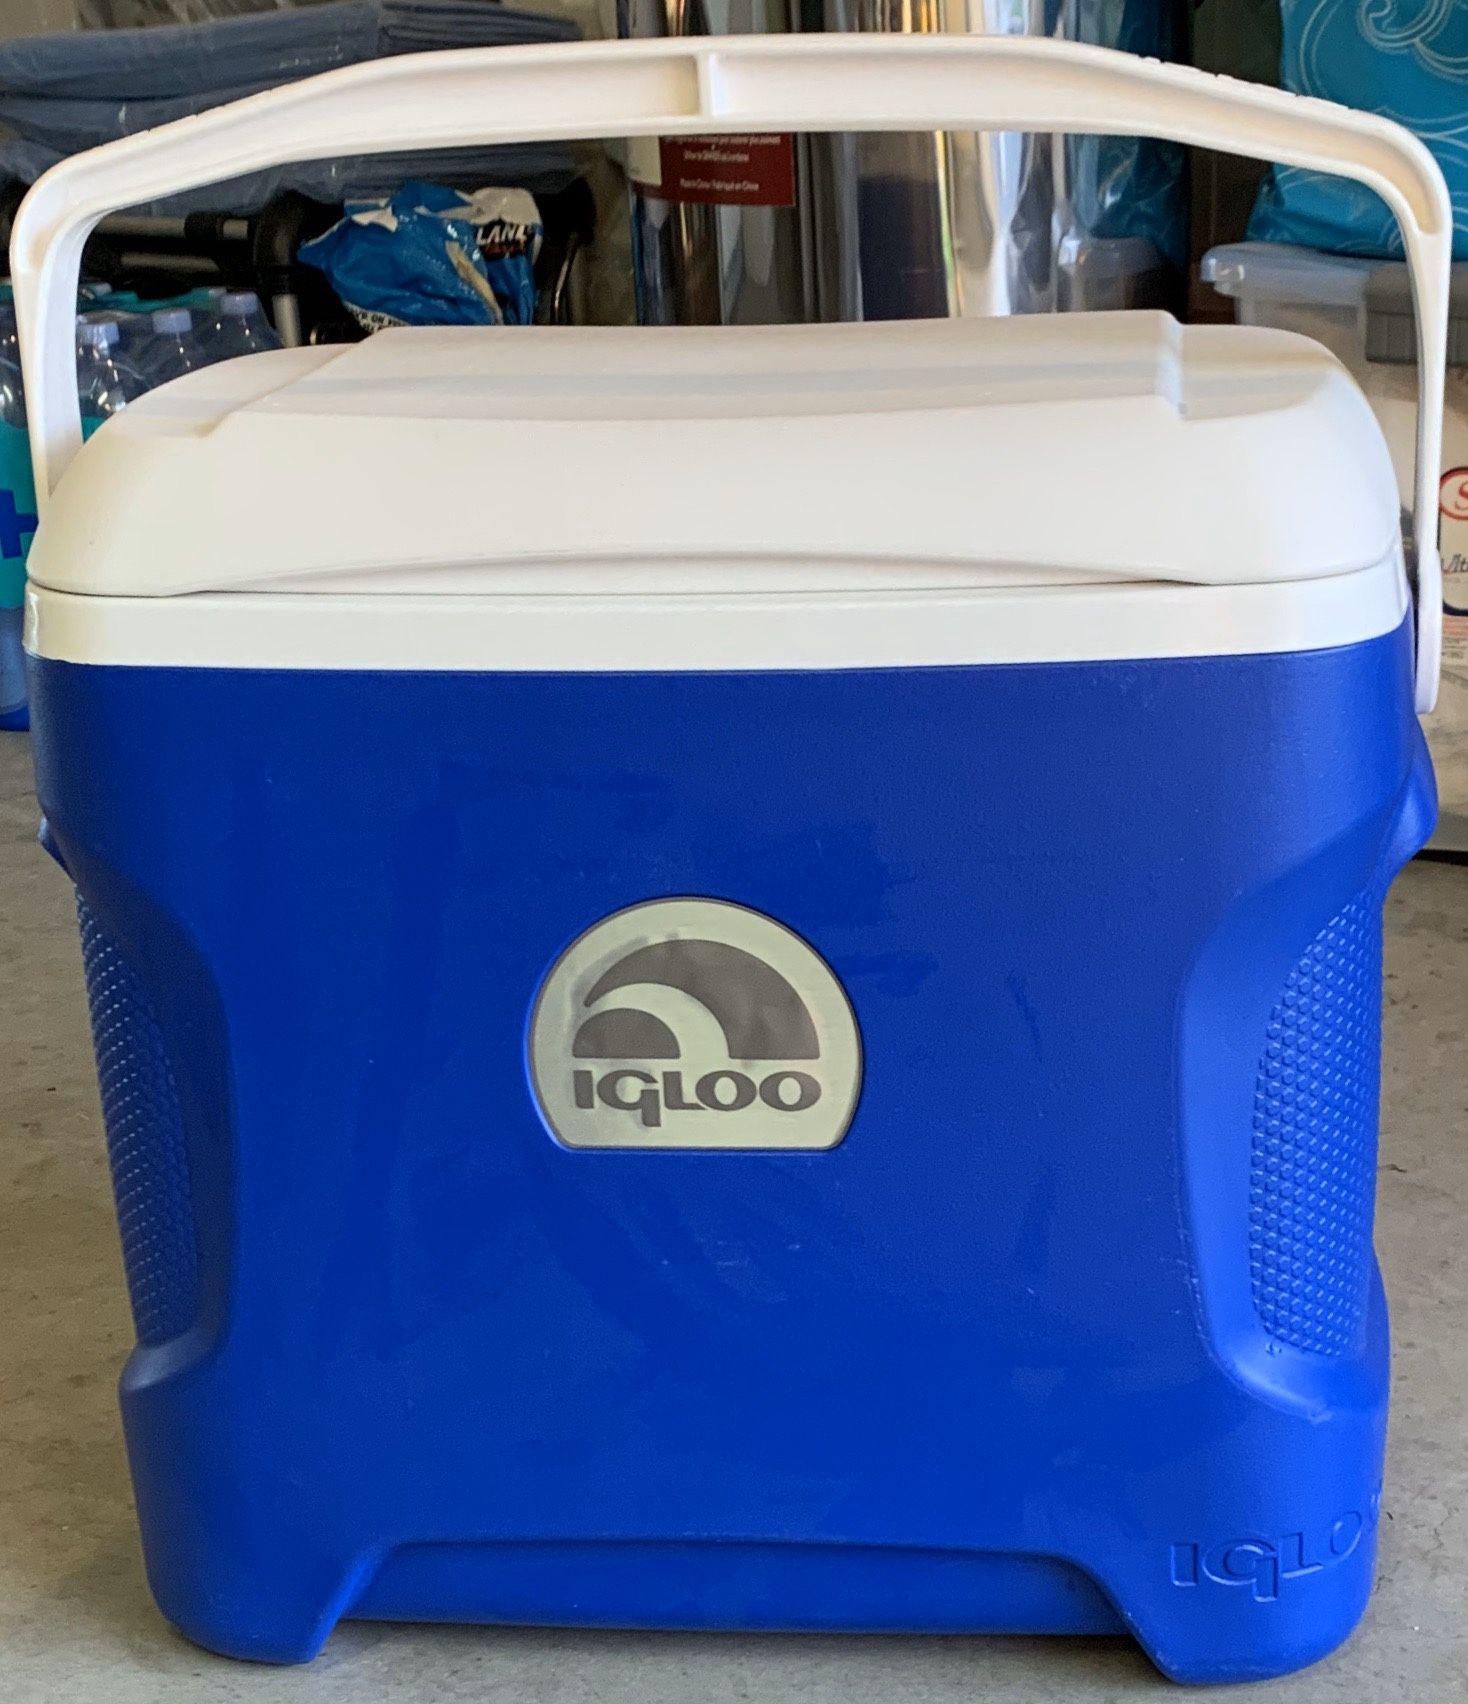 Igloo ice chest in excellent condition